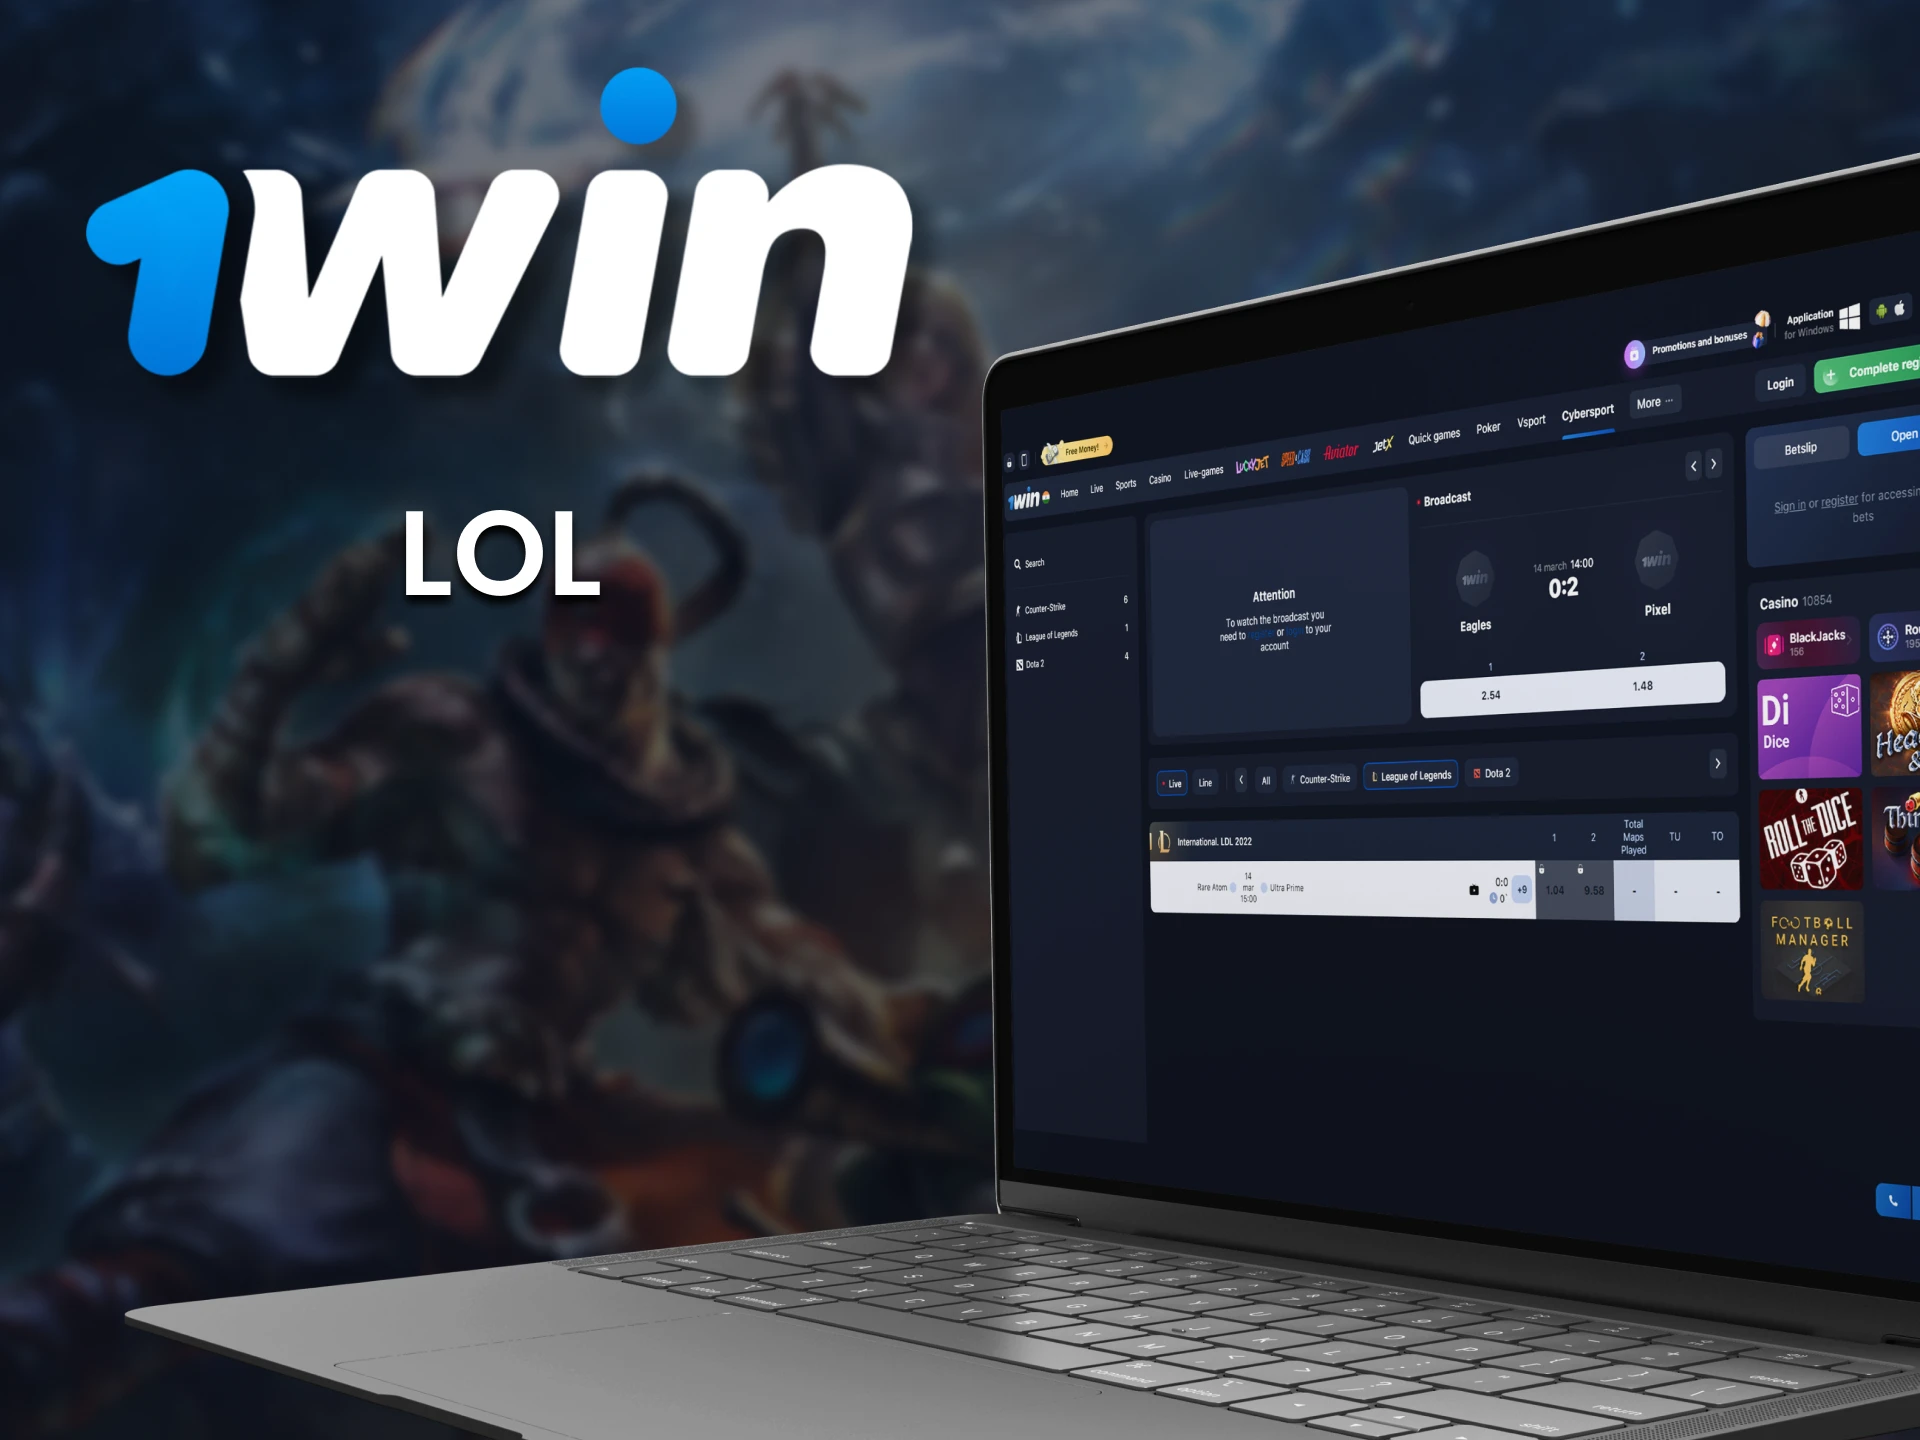 Bet on the League of Legends at 1win.